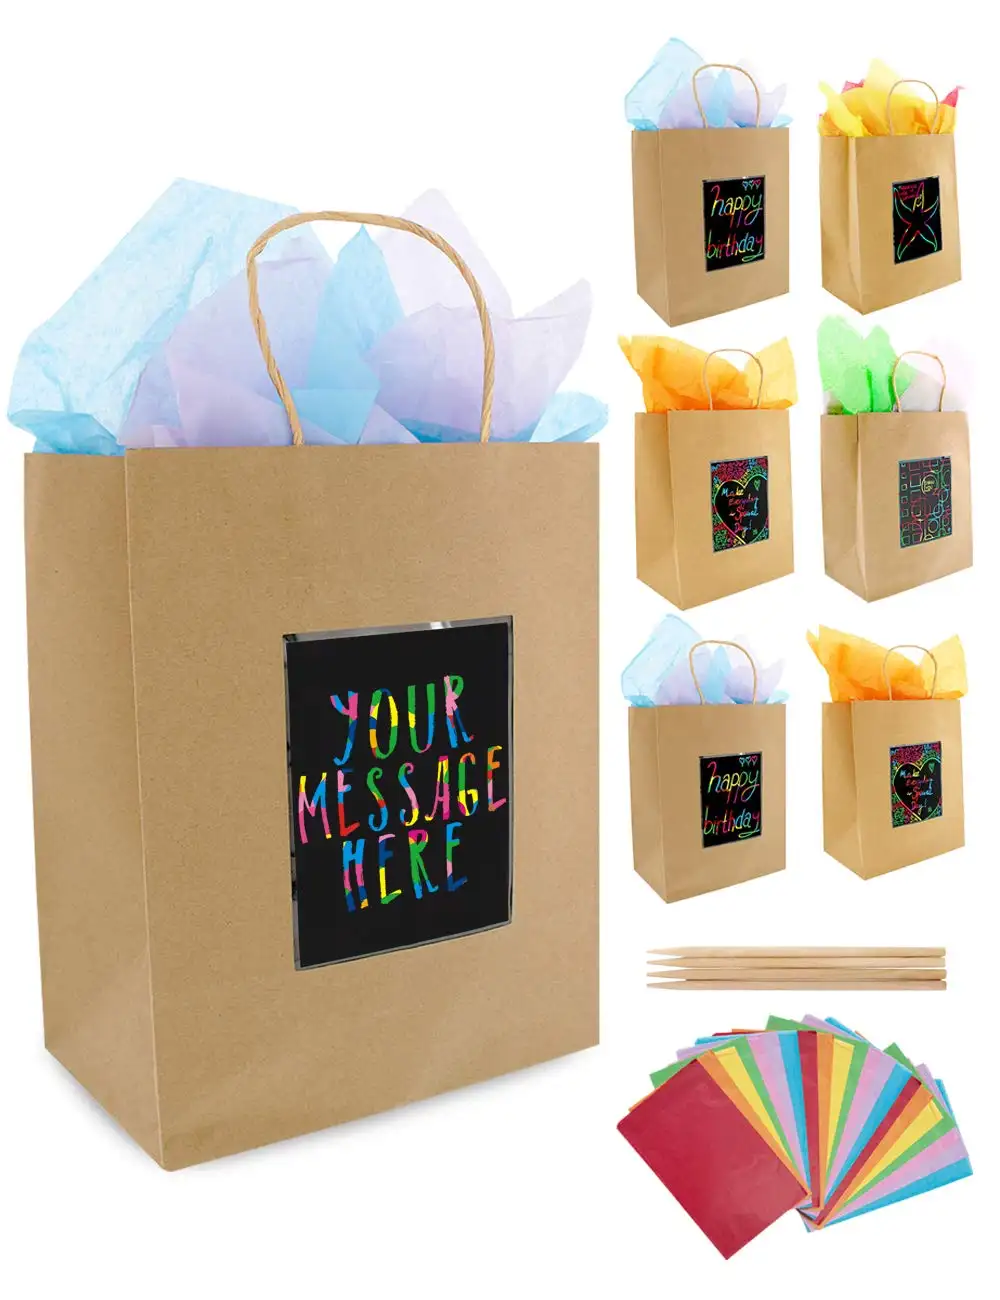 Customize Gift Bags Medium Size with Handles & Scratch Panel for Messages Personalized Sight Smell Touch Taste Sound Gift Bags